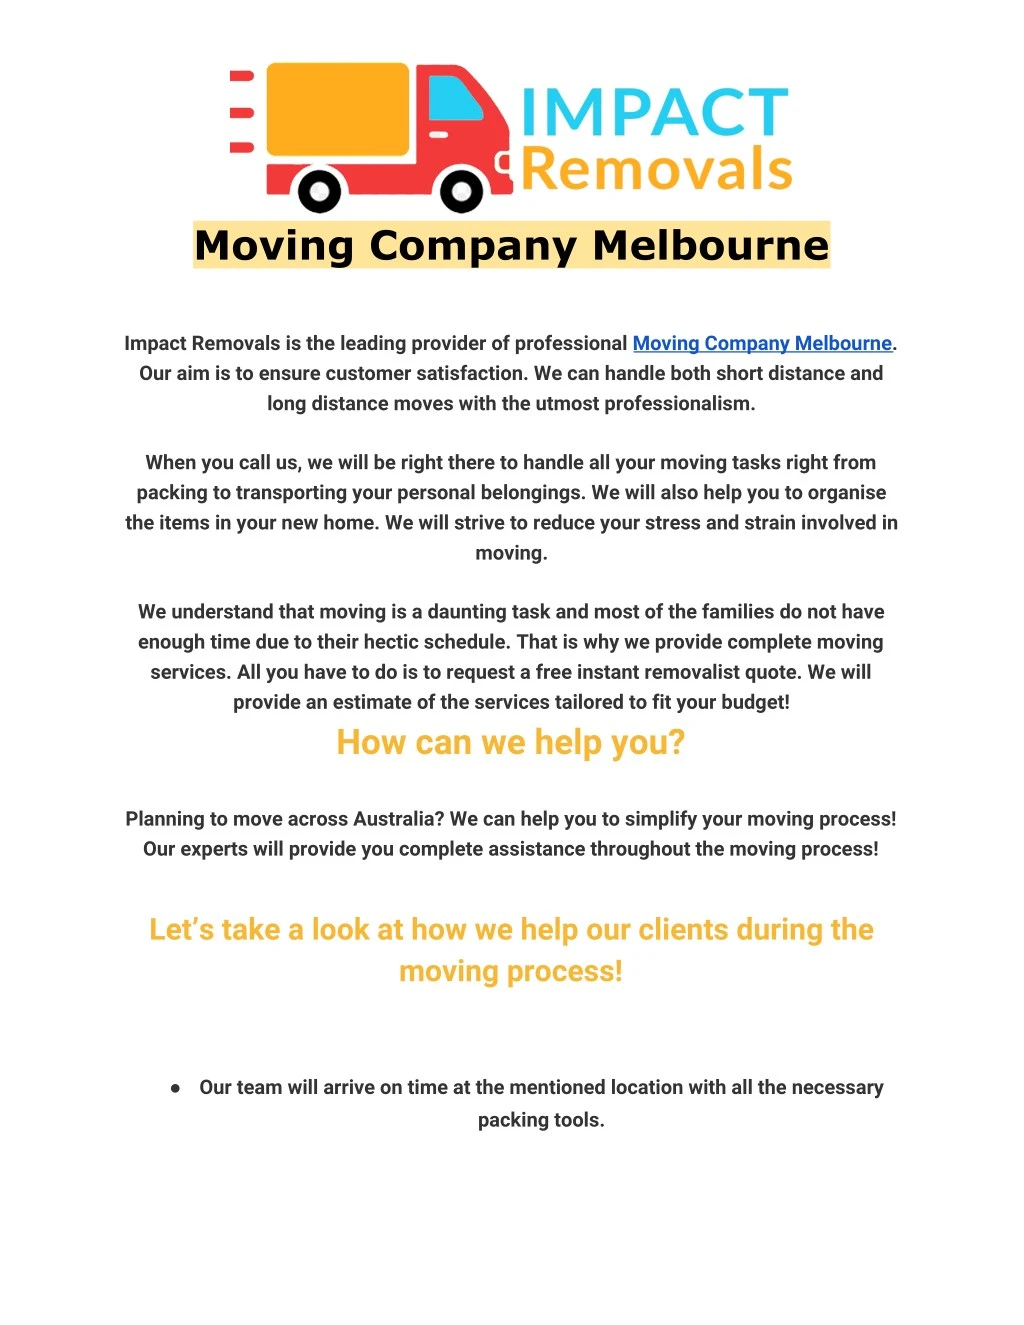 moving company melbourne impact removals n.